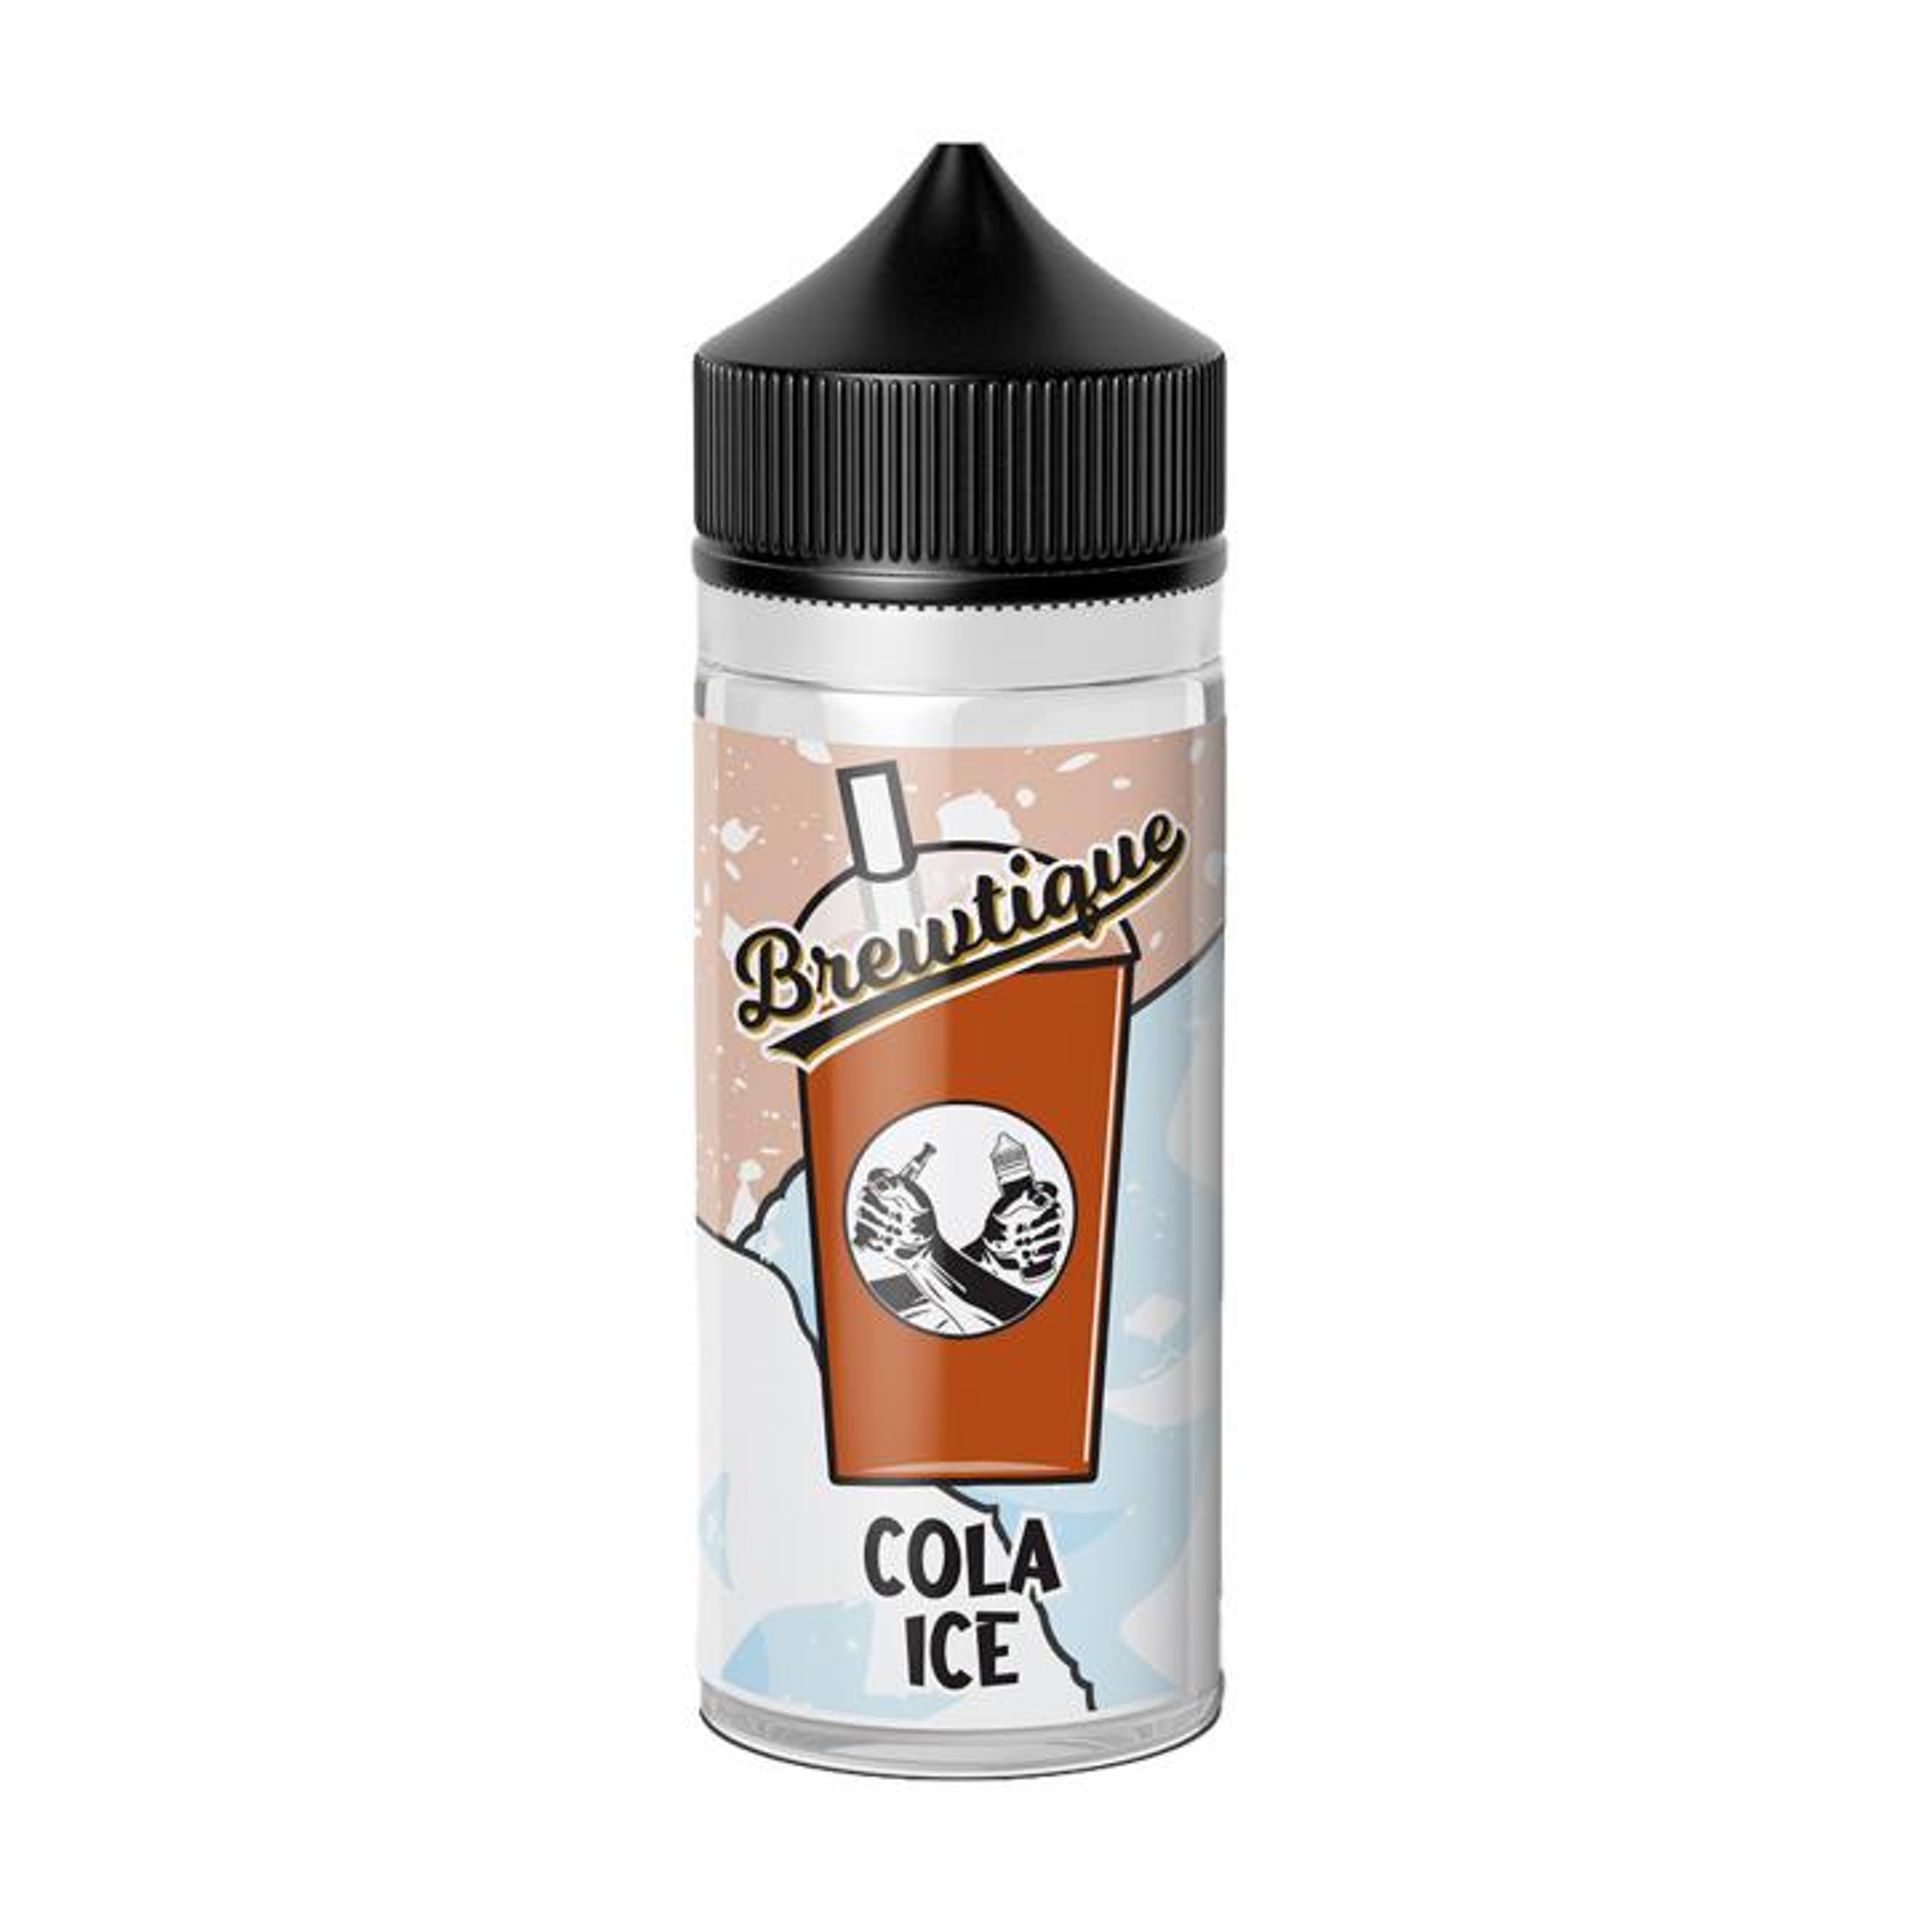 Image of Cola Ice by Brewtique